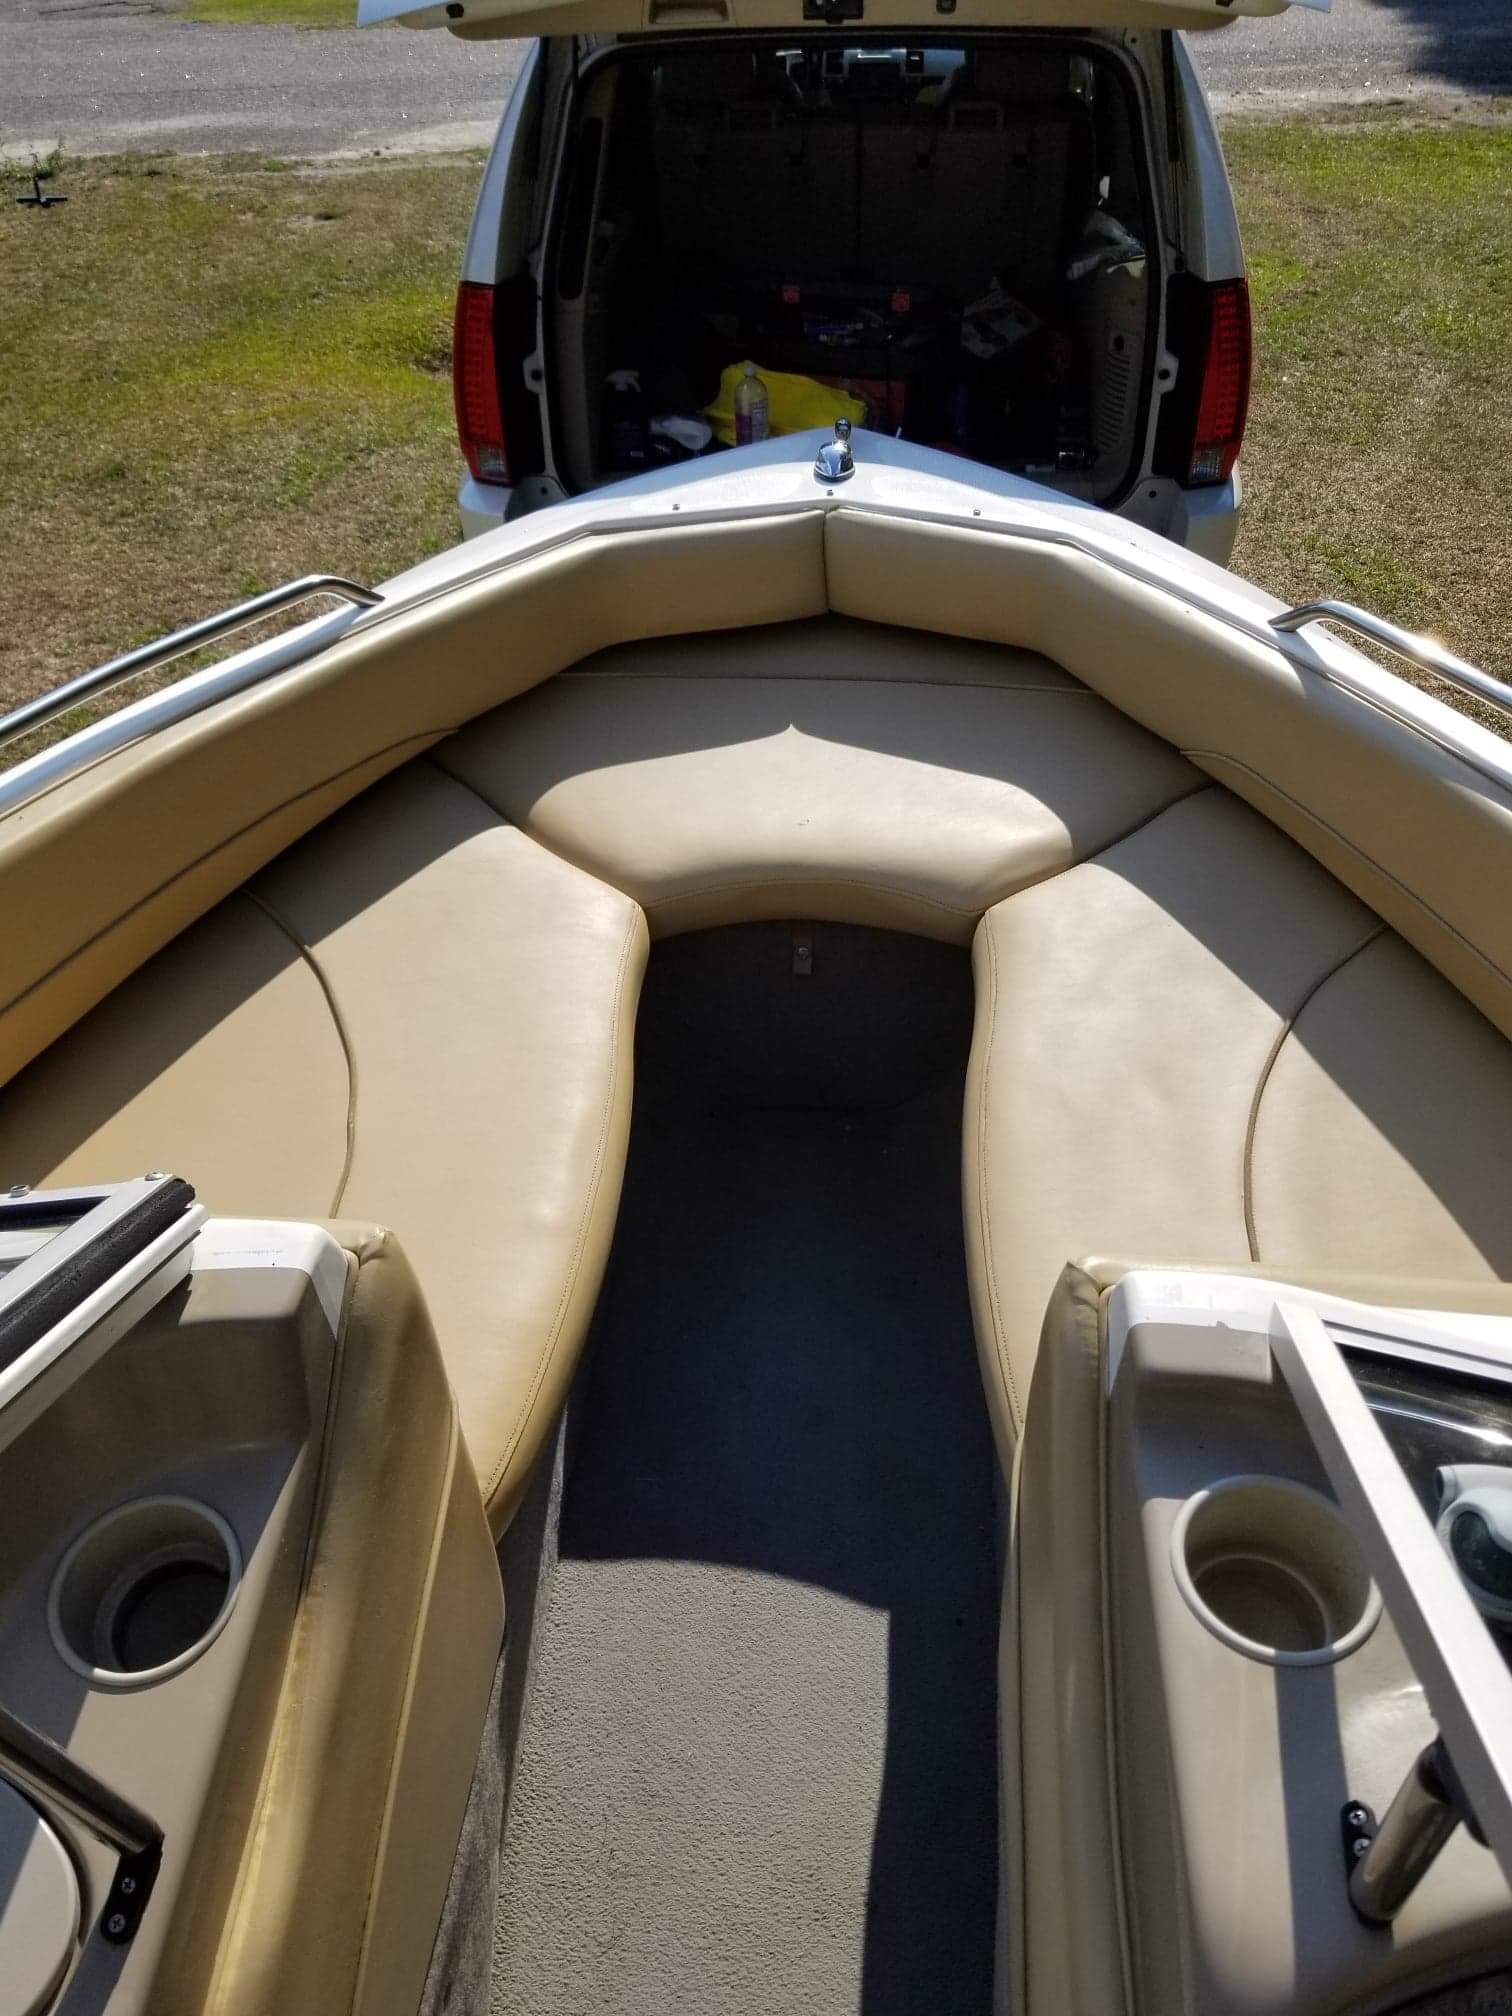 2004 19 foot Other Bayliner Power boat for sale in Myrtle Beach, SC - image 1 